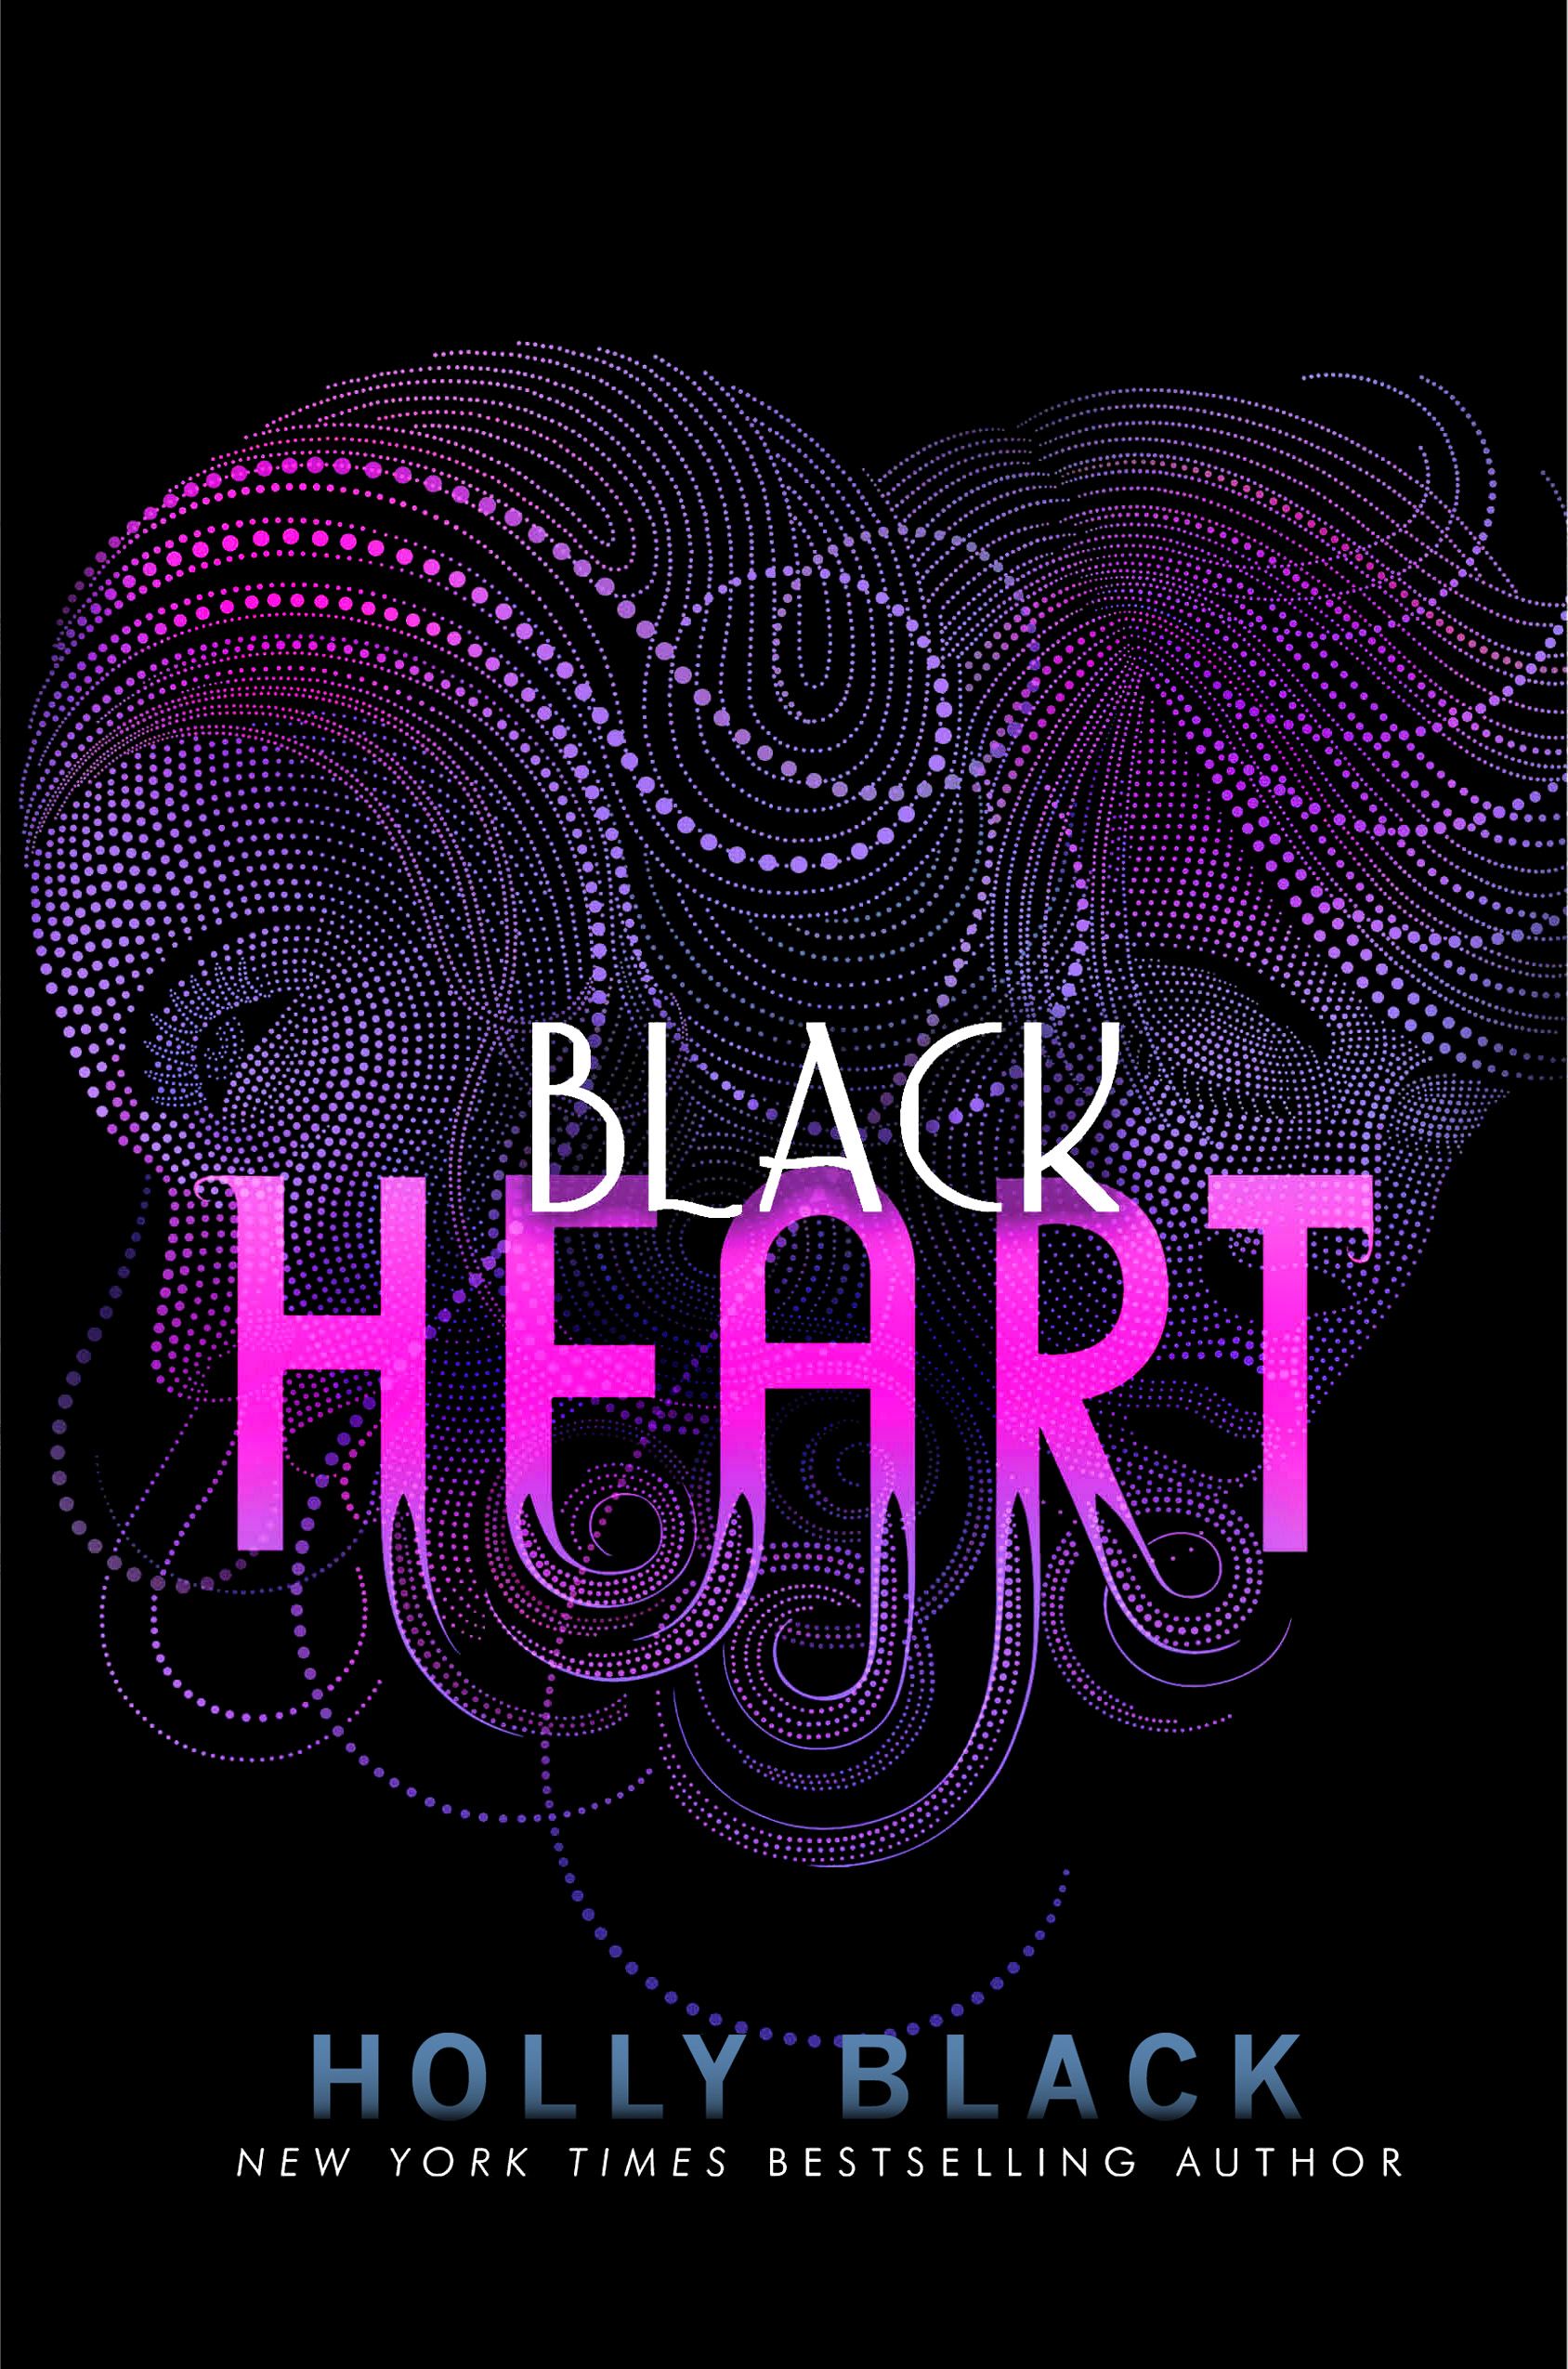 The Curse Workers: Black Heart (Series #3) (Hardcover) - image 1 of 1